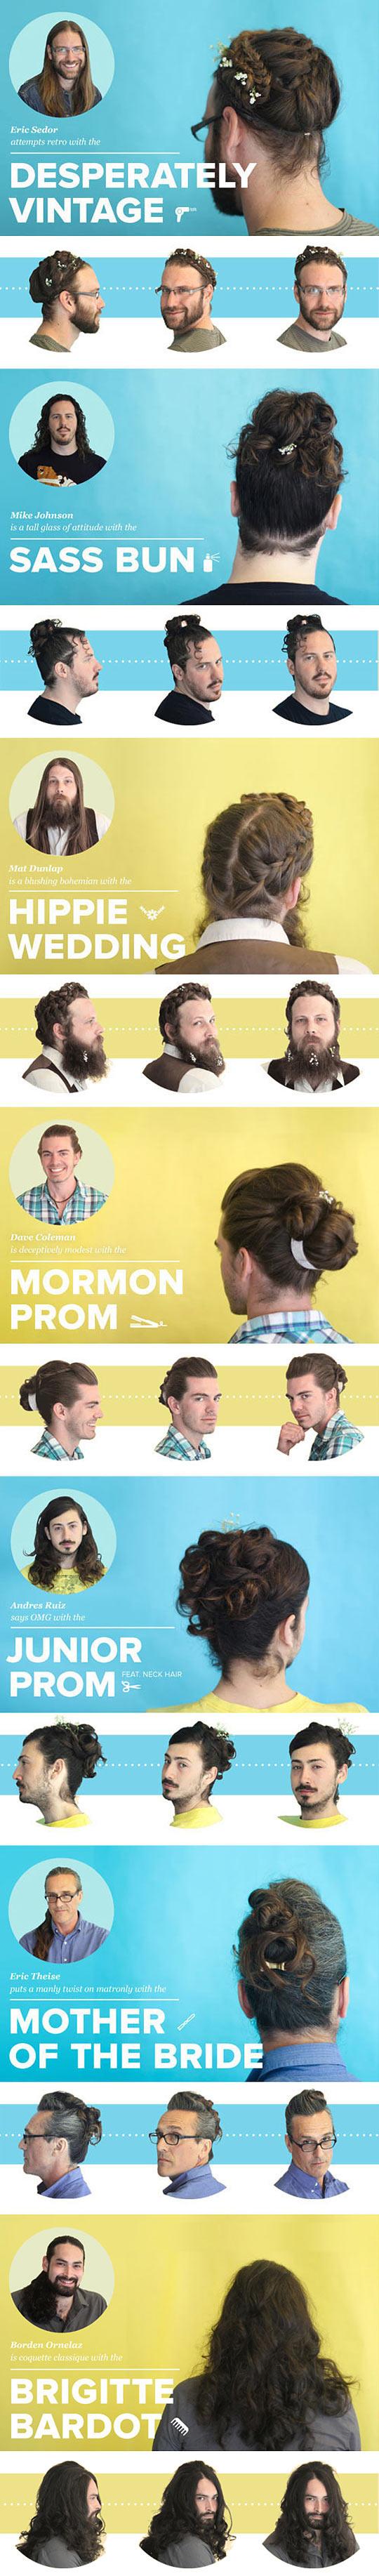 Desperately vintage, and other such hairstyles for men.